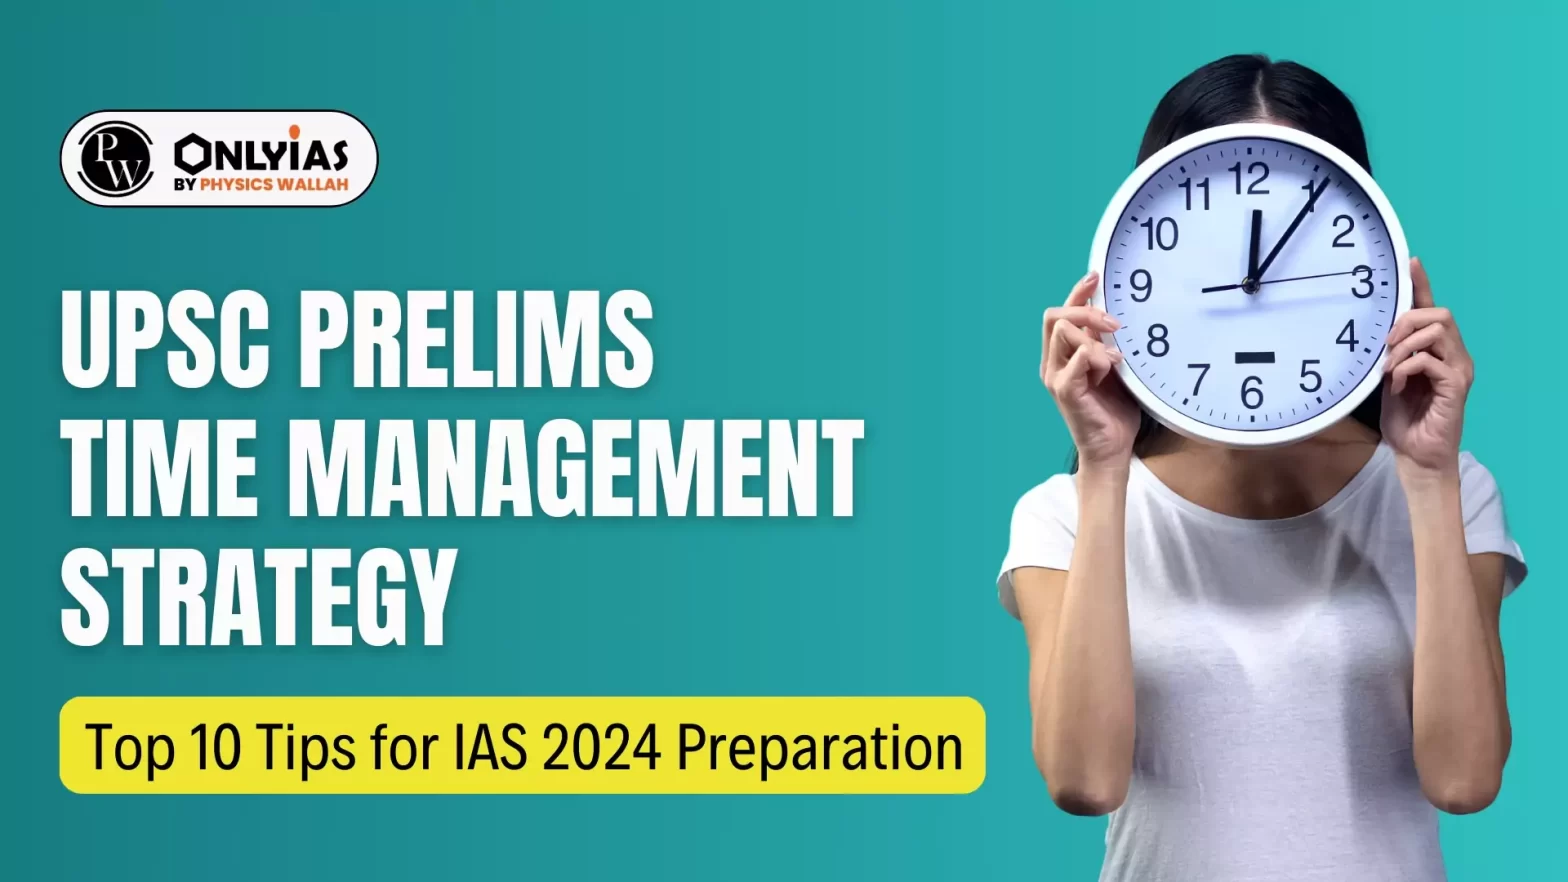 UPSC Prelims Time Management Strategy, Top 10 Tips for IAS 2024 Preparation